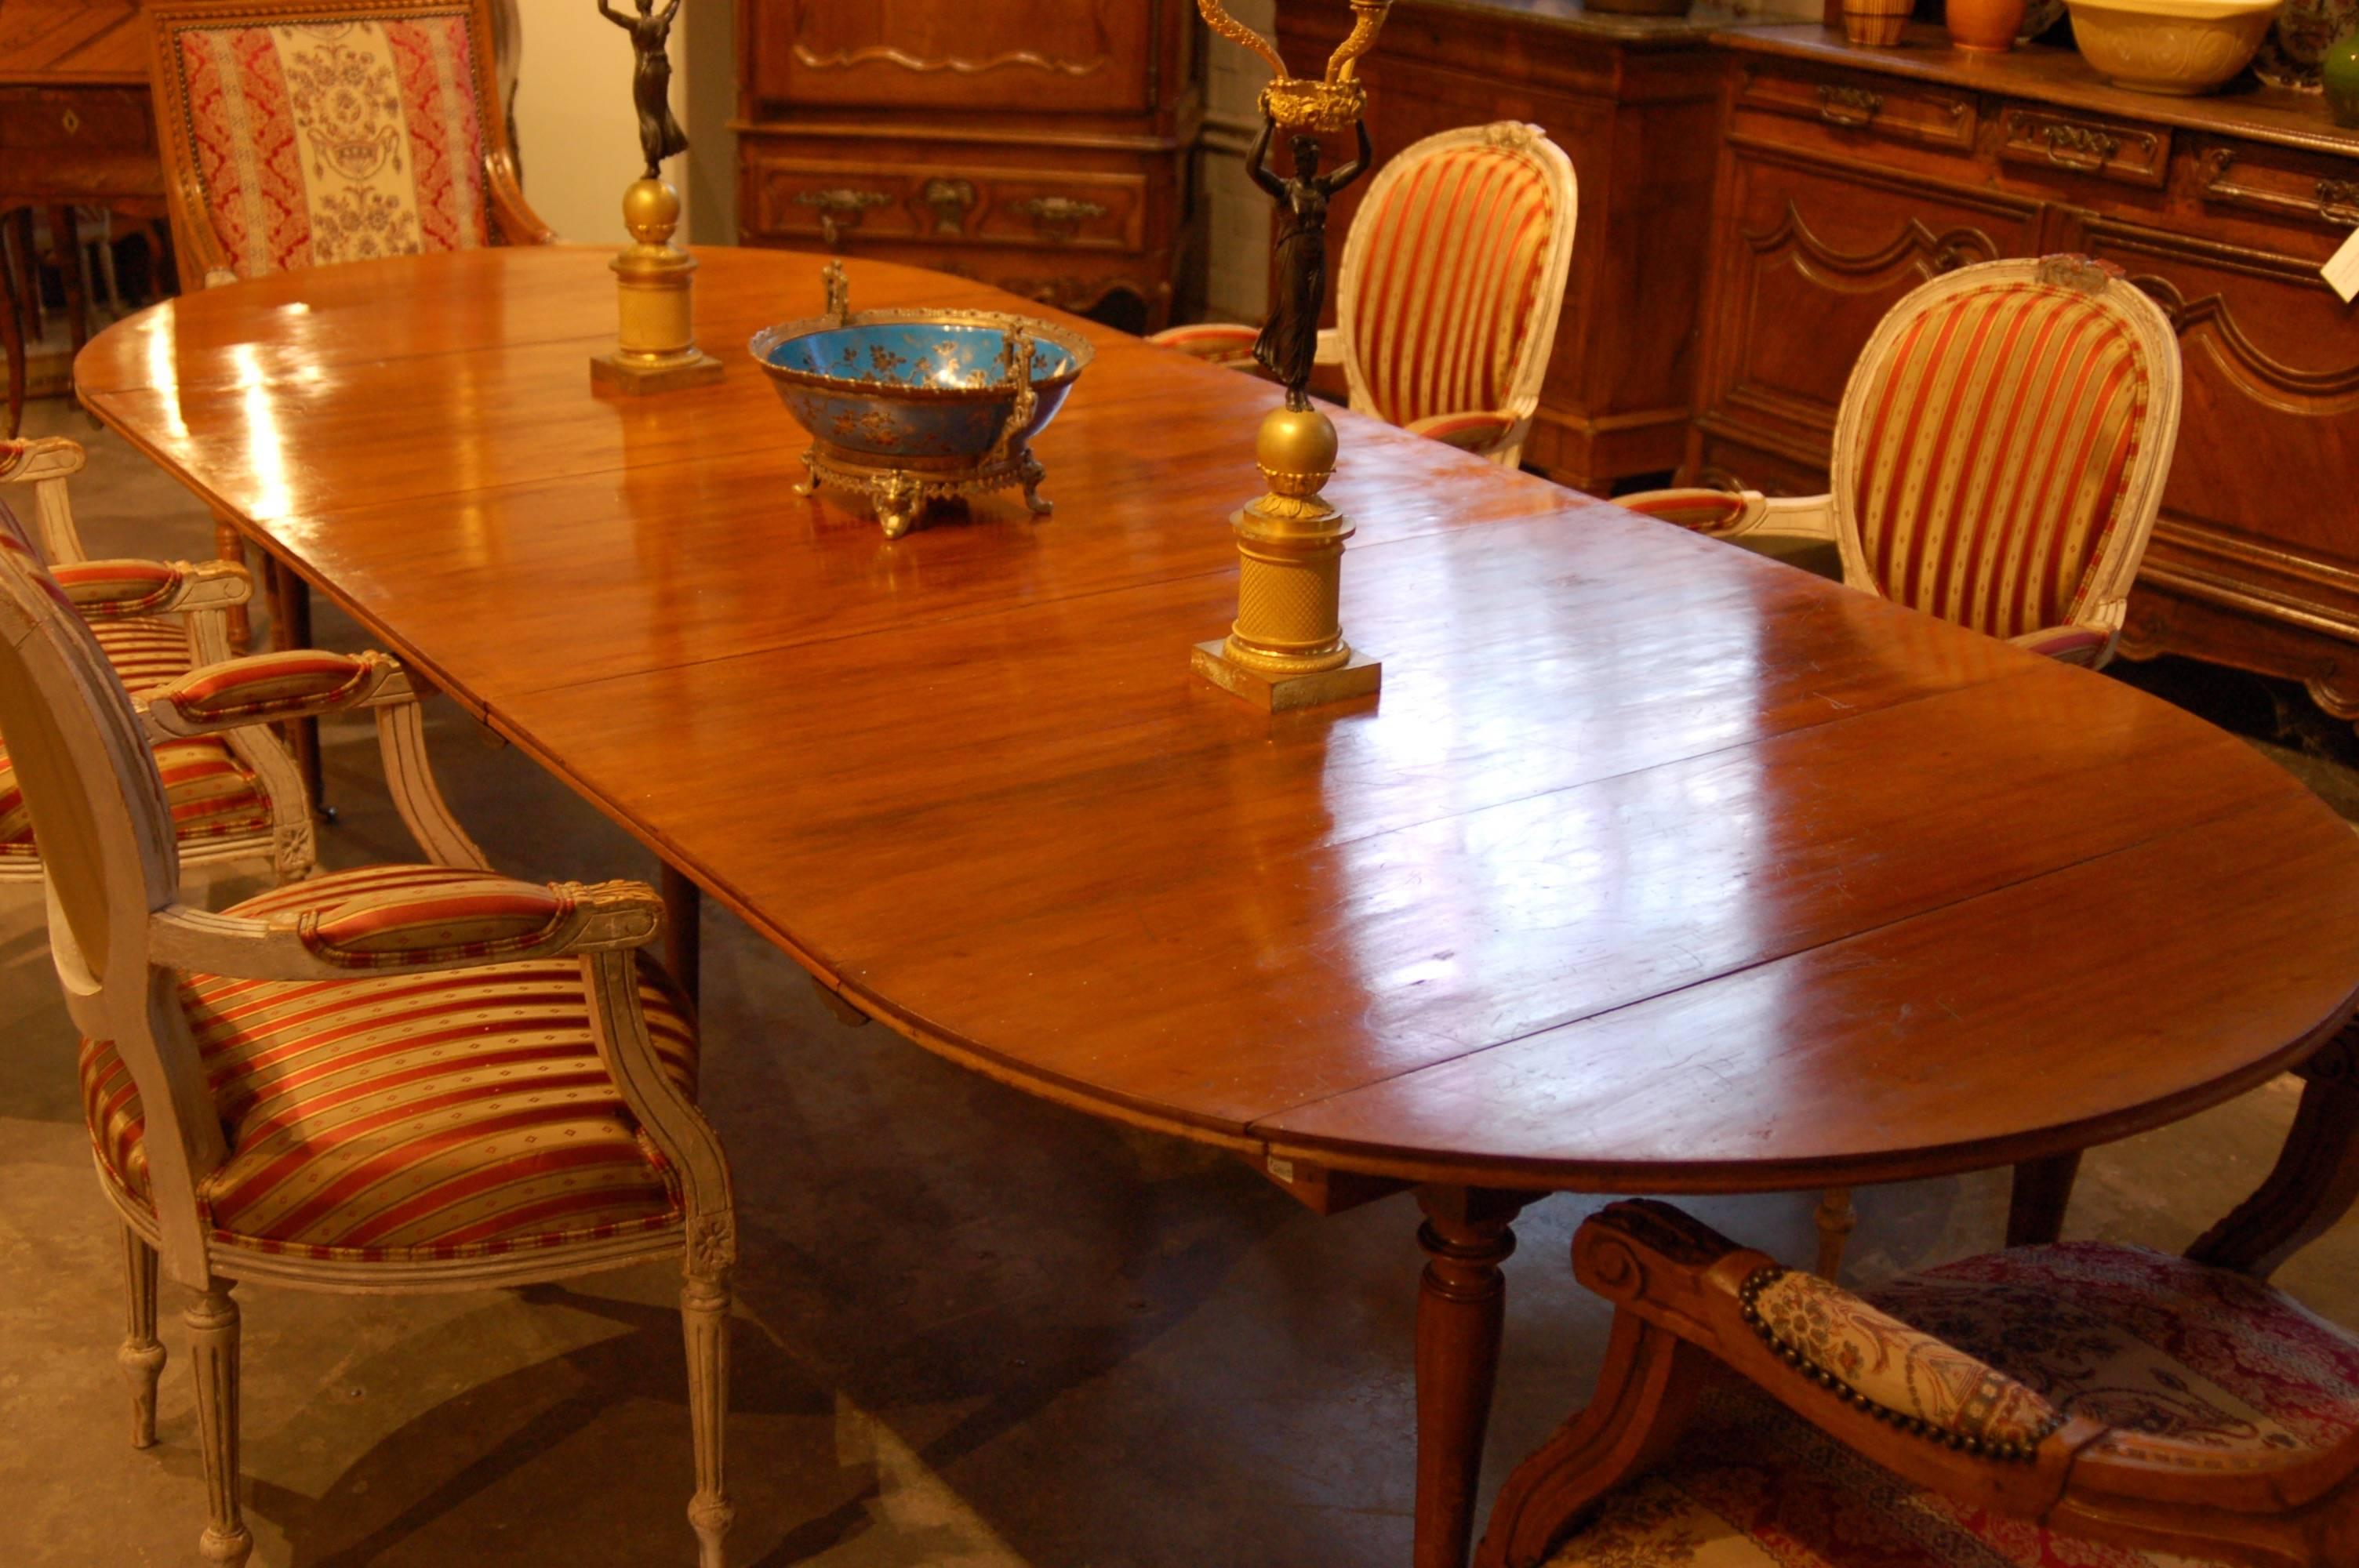 Large extension dining room table with three wide leaves and drop ends.
Closes into a round table 48 inches in diameter. Leaves a later addition but a perfect match and held securely in place with bronze table forks.

 